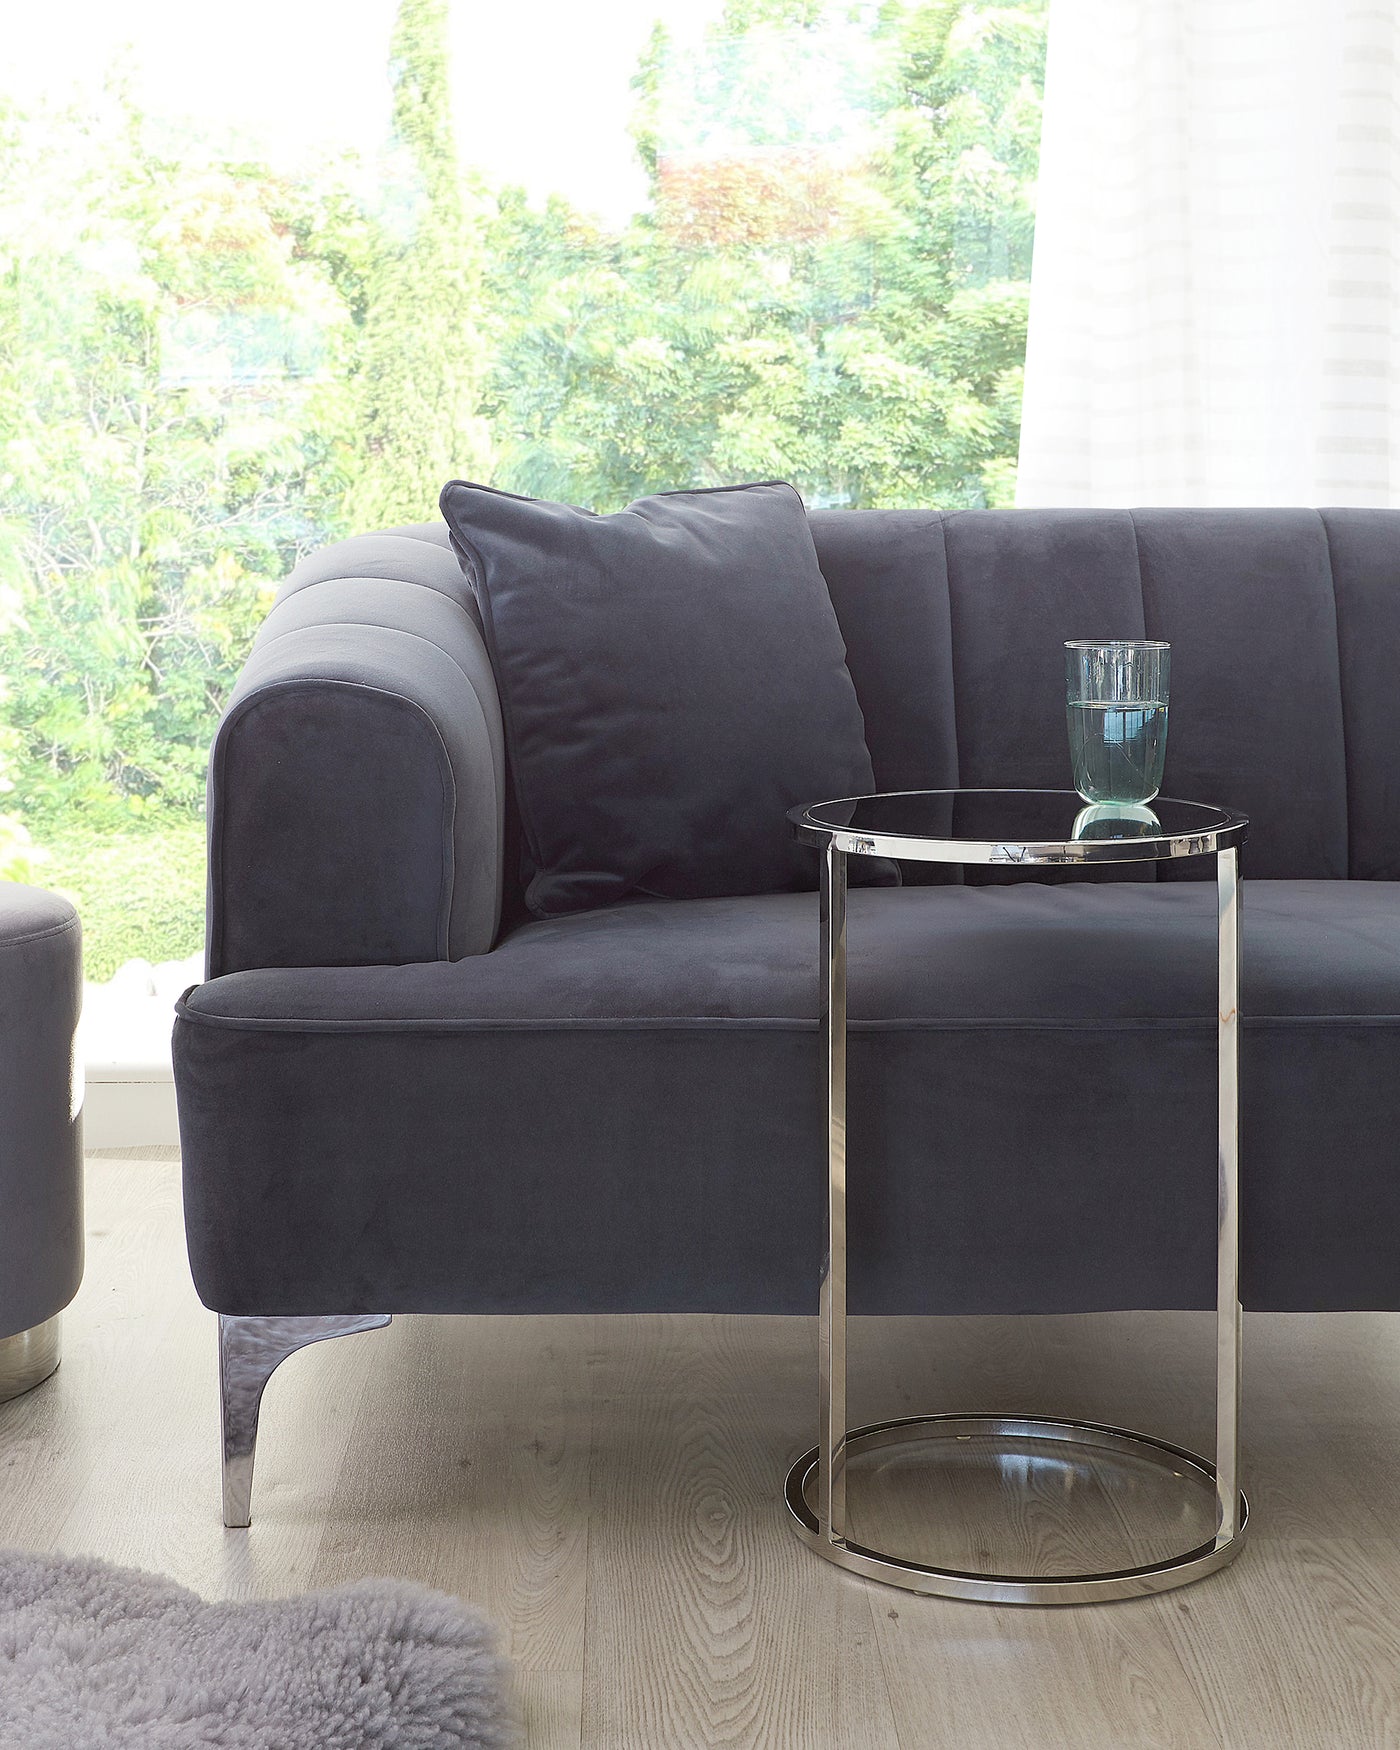 Contemporary dark grey fabric sofa with plush cushions and a round, chrome accent side table with a clear glass top.